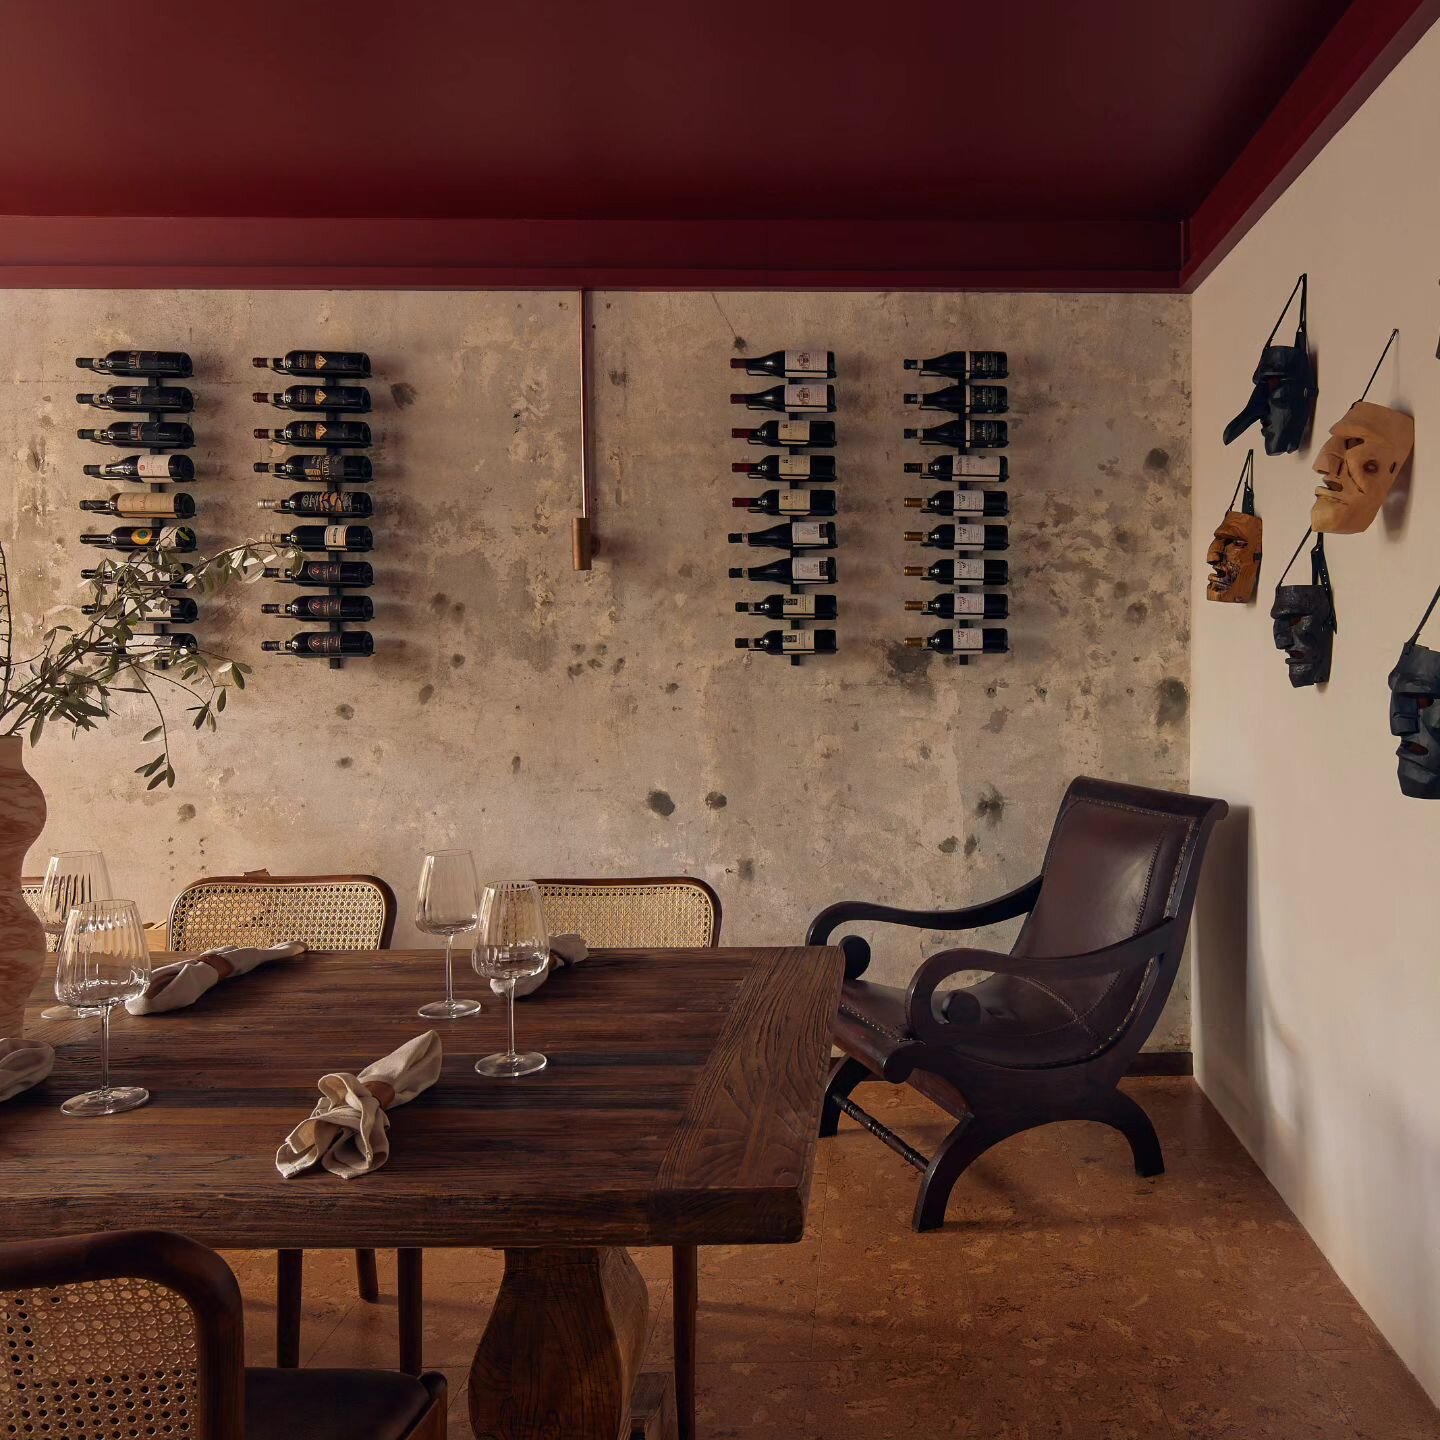 Check out our private room Cantina. 

When you feel like you want your own space surrounded by wines and Sardinian masks.

For up to 16 guests is the perfect space for your next special gathering.

Email events@pilloni.com.au for more information and